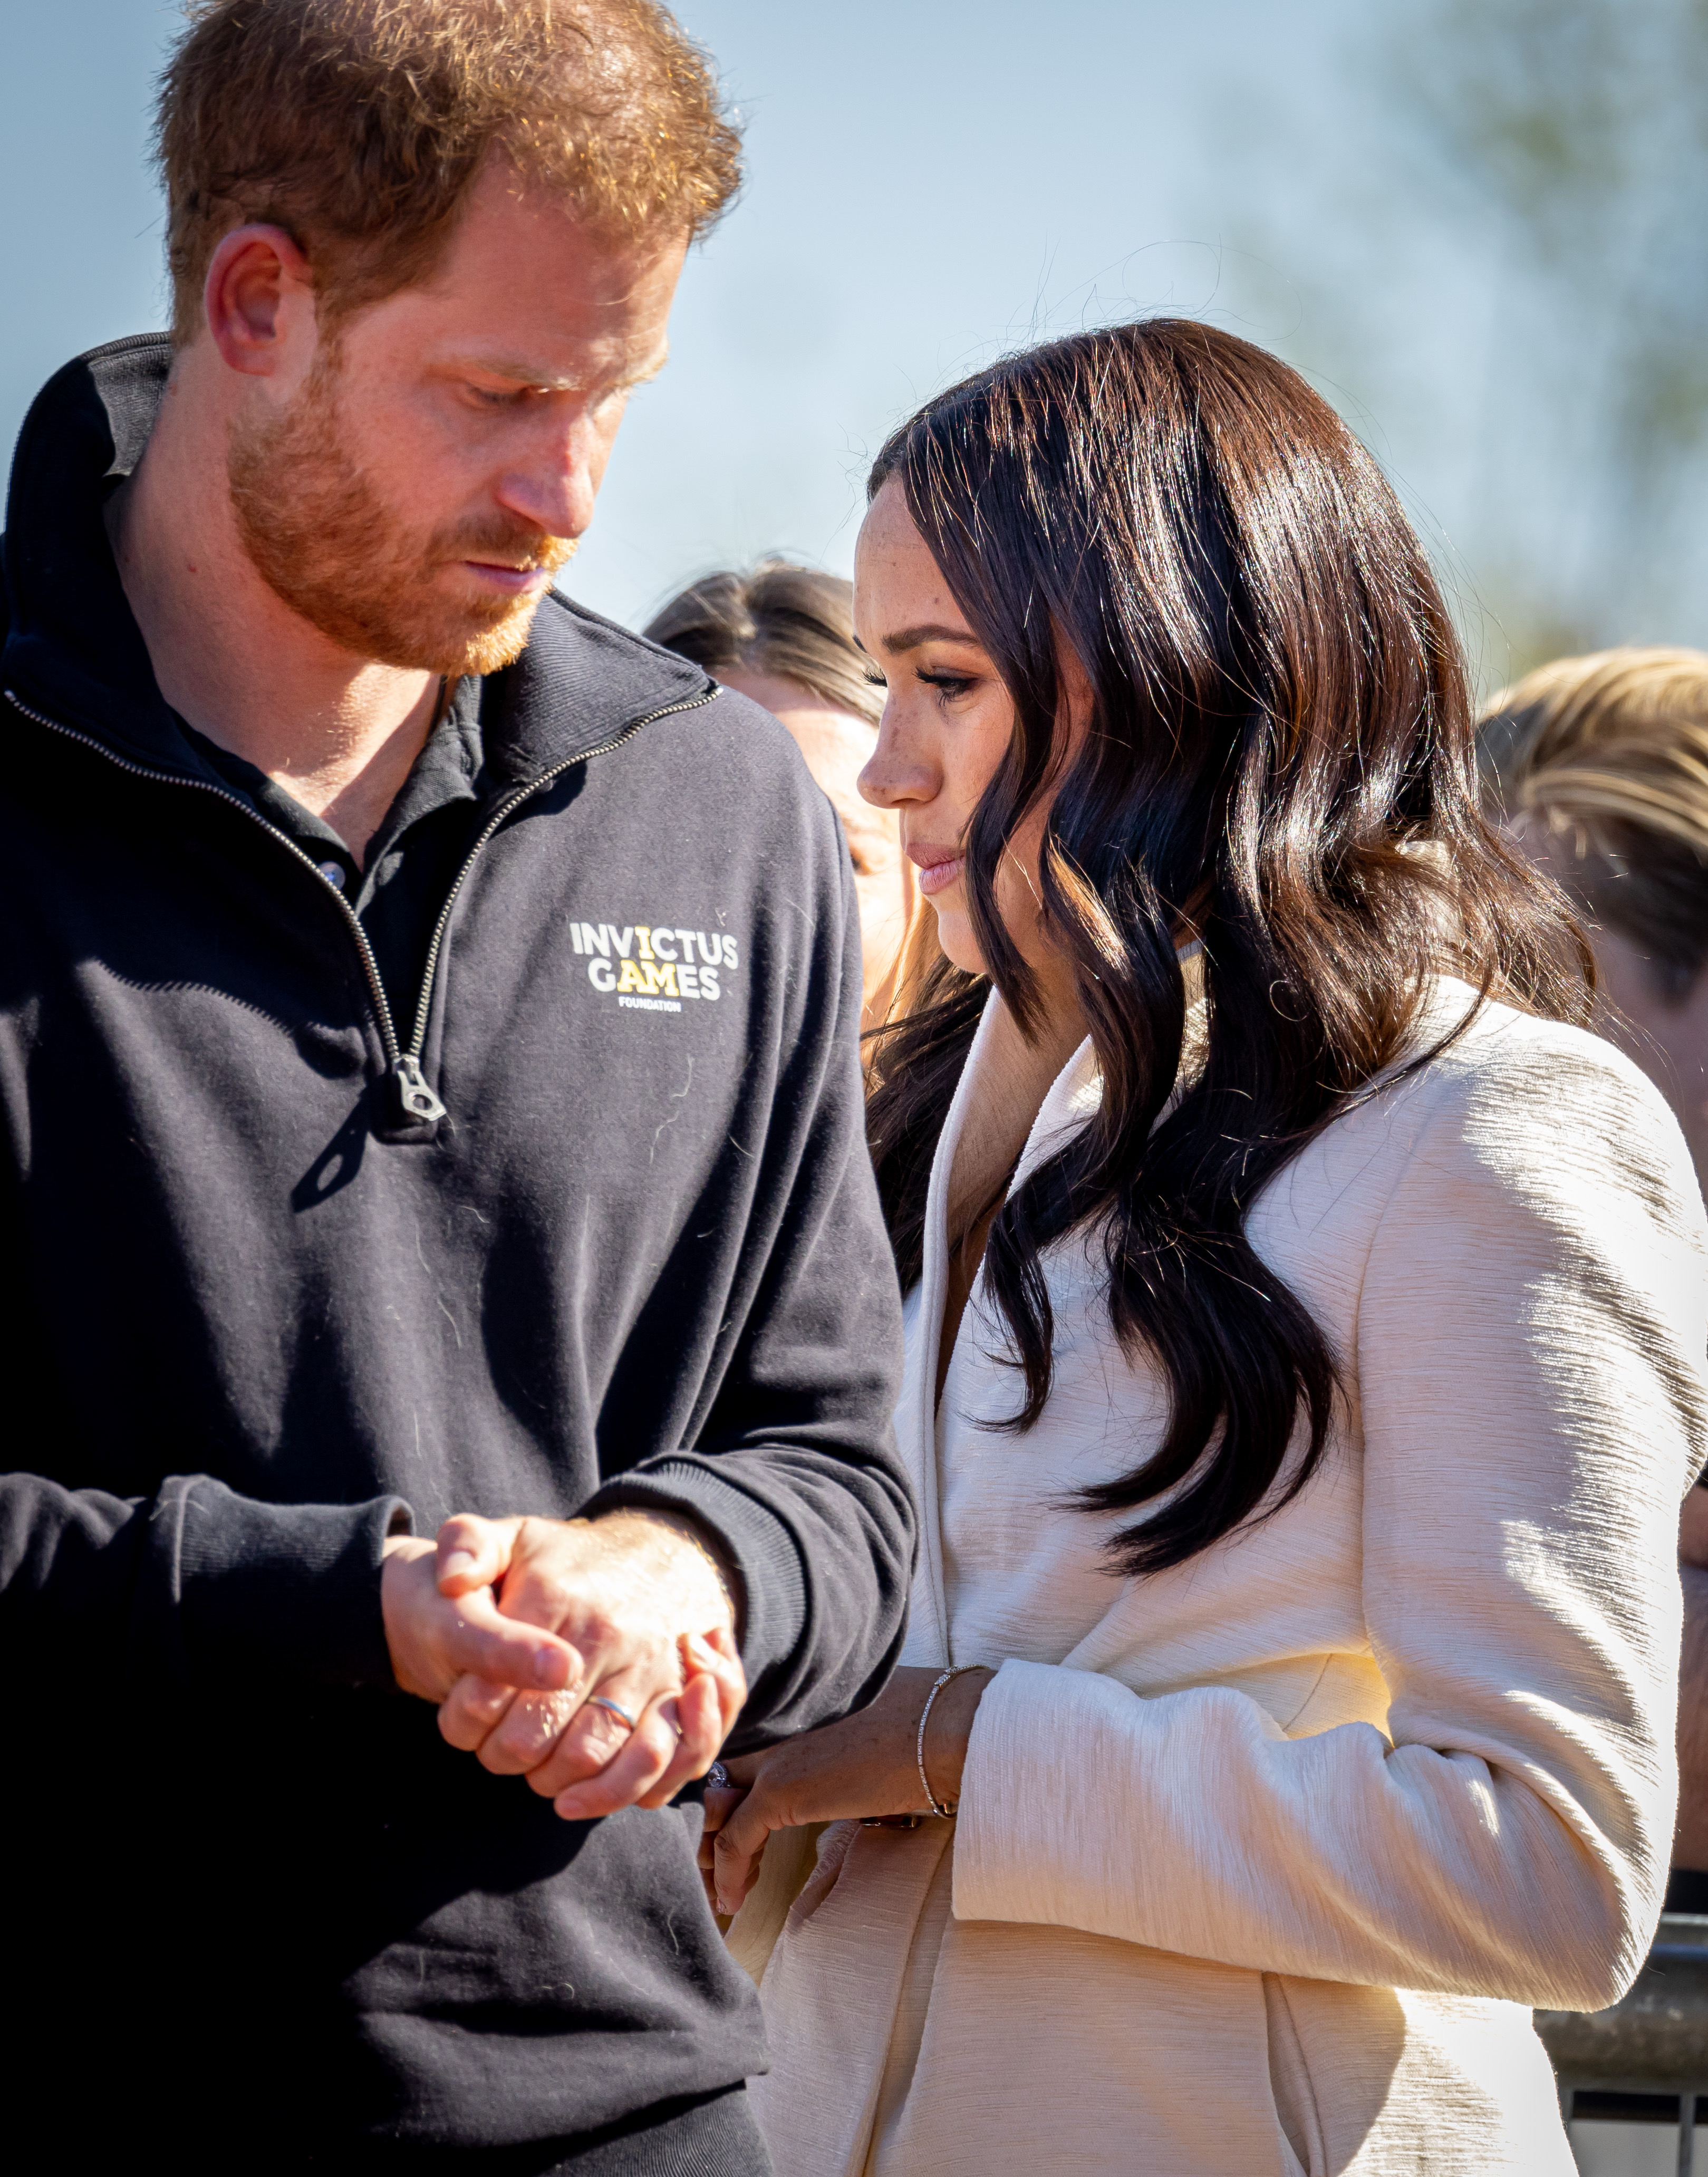 Prince Harry and Meghan Markle visit the Invictus Games in Zuiderpark on April 17, 2022, in The Hague, Netherlands. | Source: Getty Images